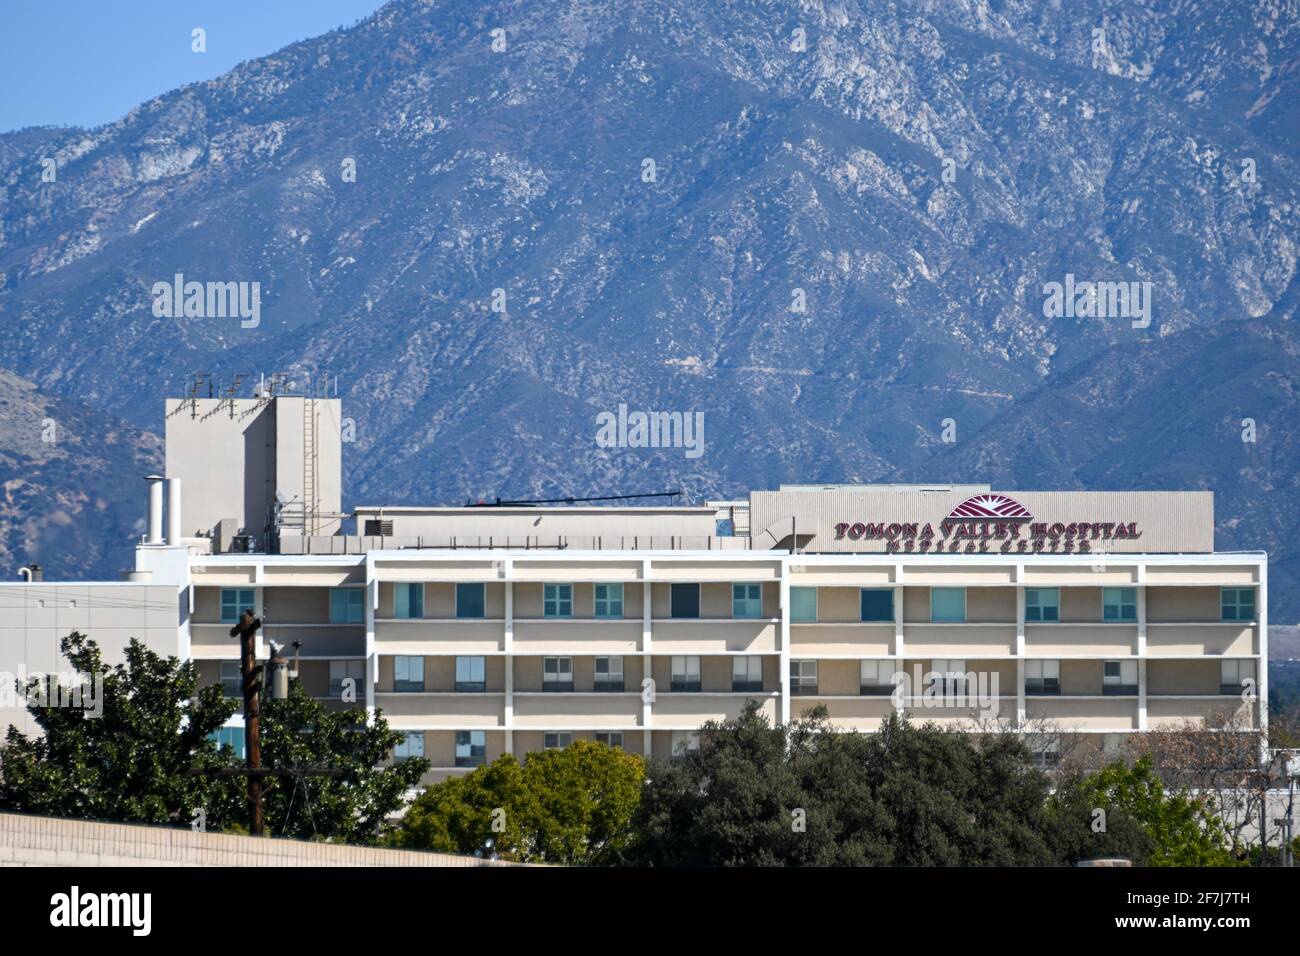 General overall view of the Pomona Valley Hospital Medical Center, Sunday, Feb 21, 2021 in Pomona, Calif. (Dylan Stewart/Image of Sport) Stock Photo